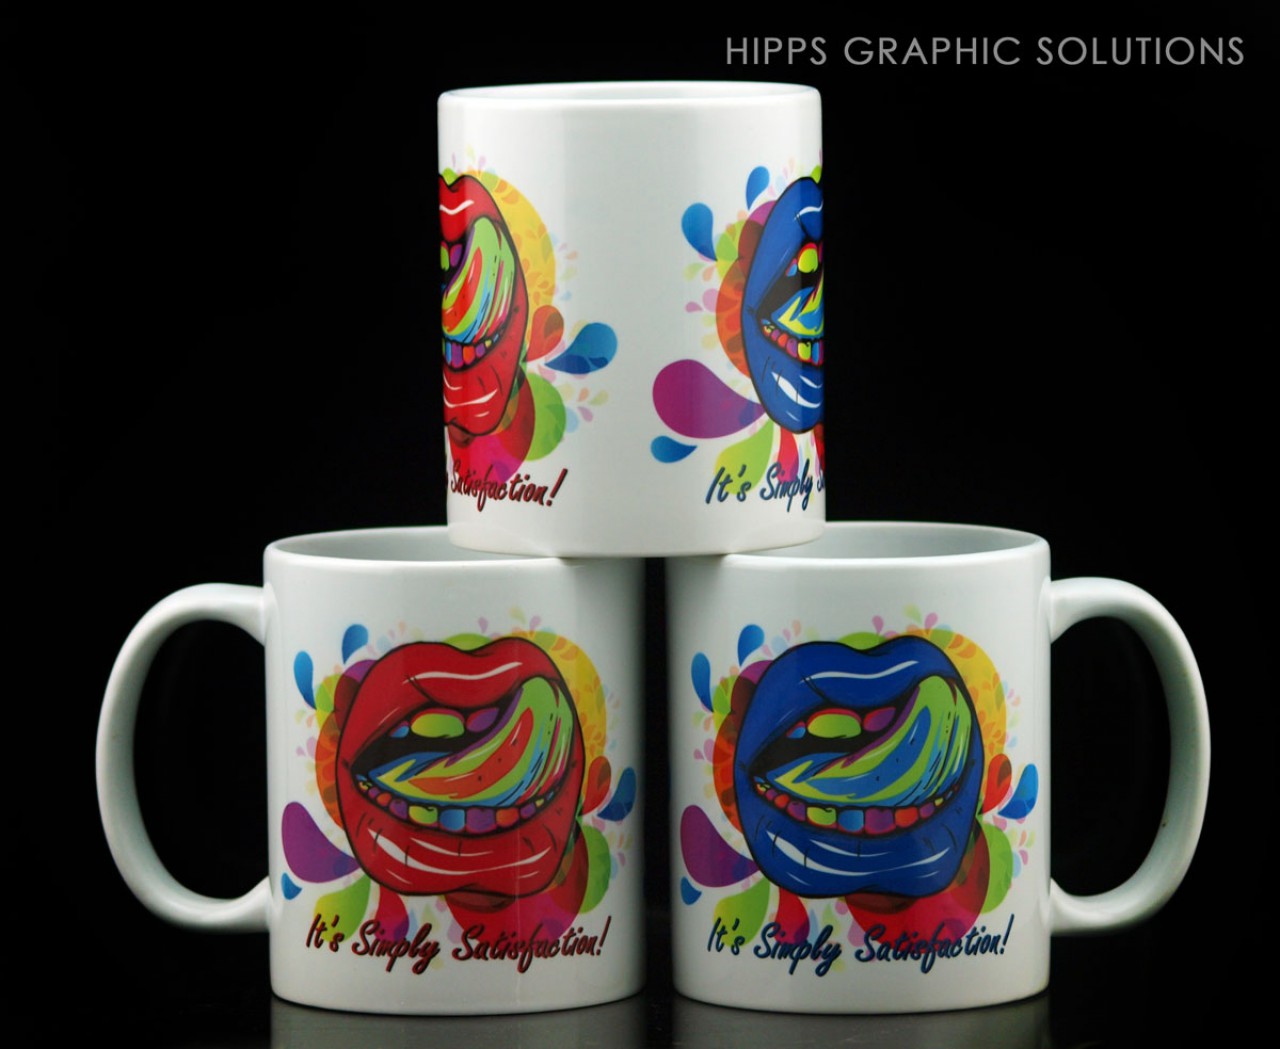 Sublimation Coffee Mugs  What and How - Sublimation Mugs